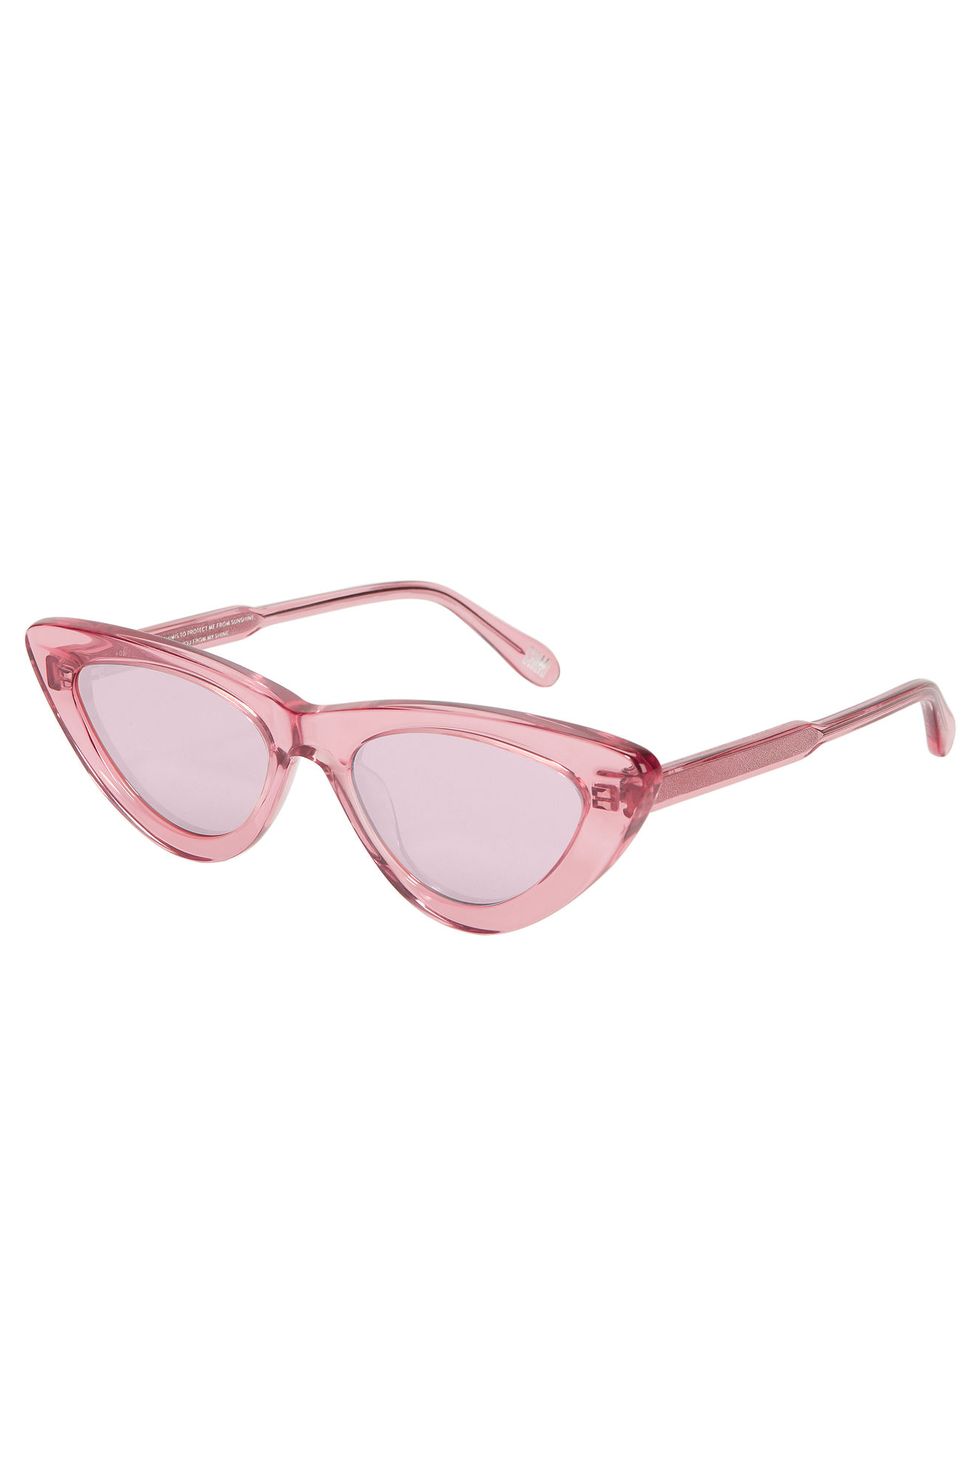 Eyewear, Sunglasses, Glasses, Pink, Personal protective equipment, Vision care, Transparent material, Goggles, aviator sunglass, Eye glass accessory, 